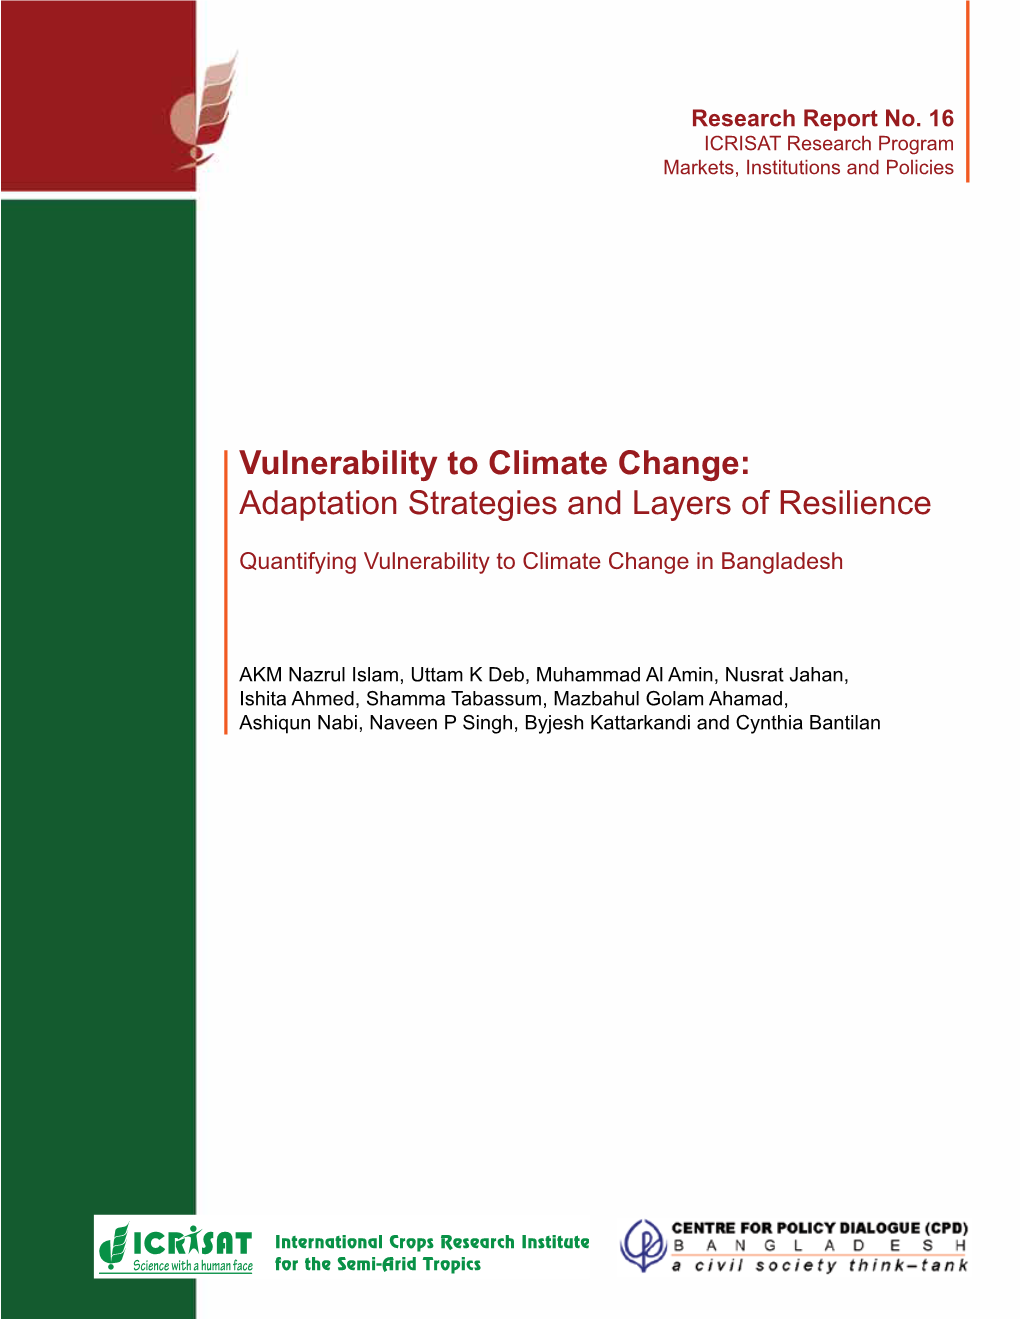 Vulnerability to Climate Change: Adaptation Strategies and Layers of Resilience